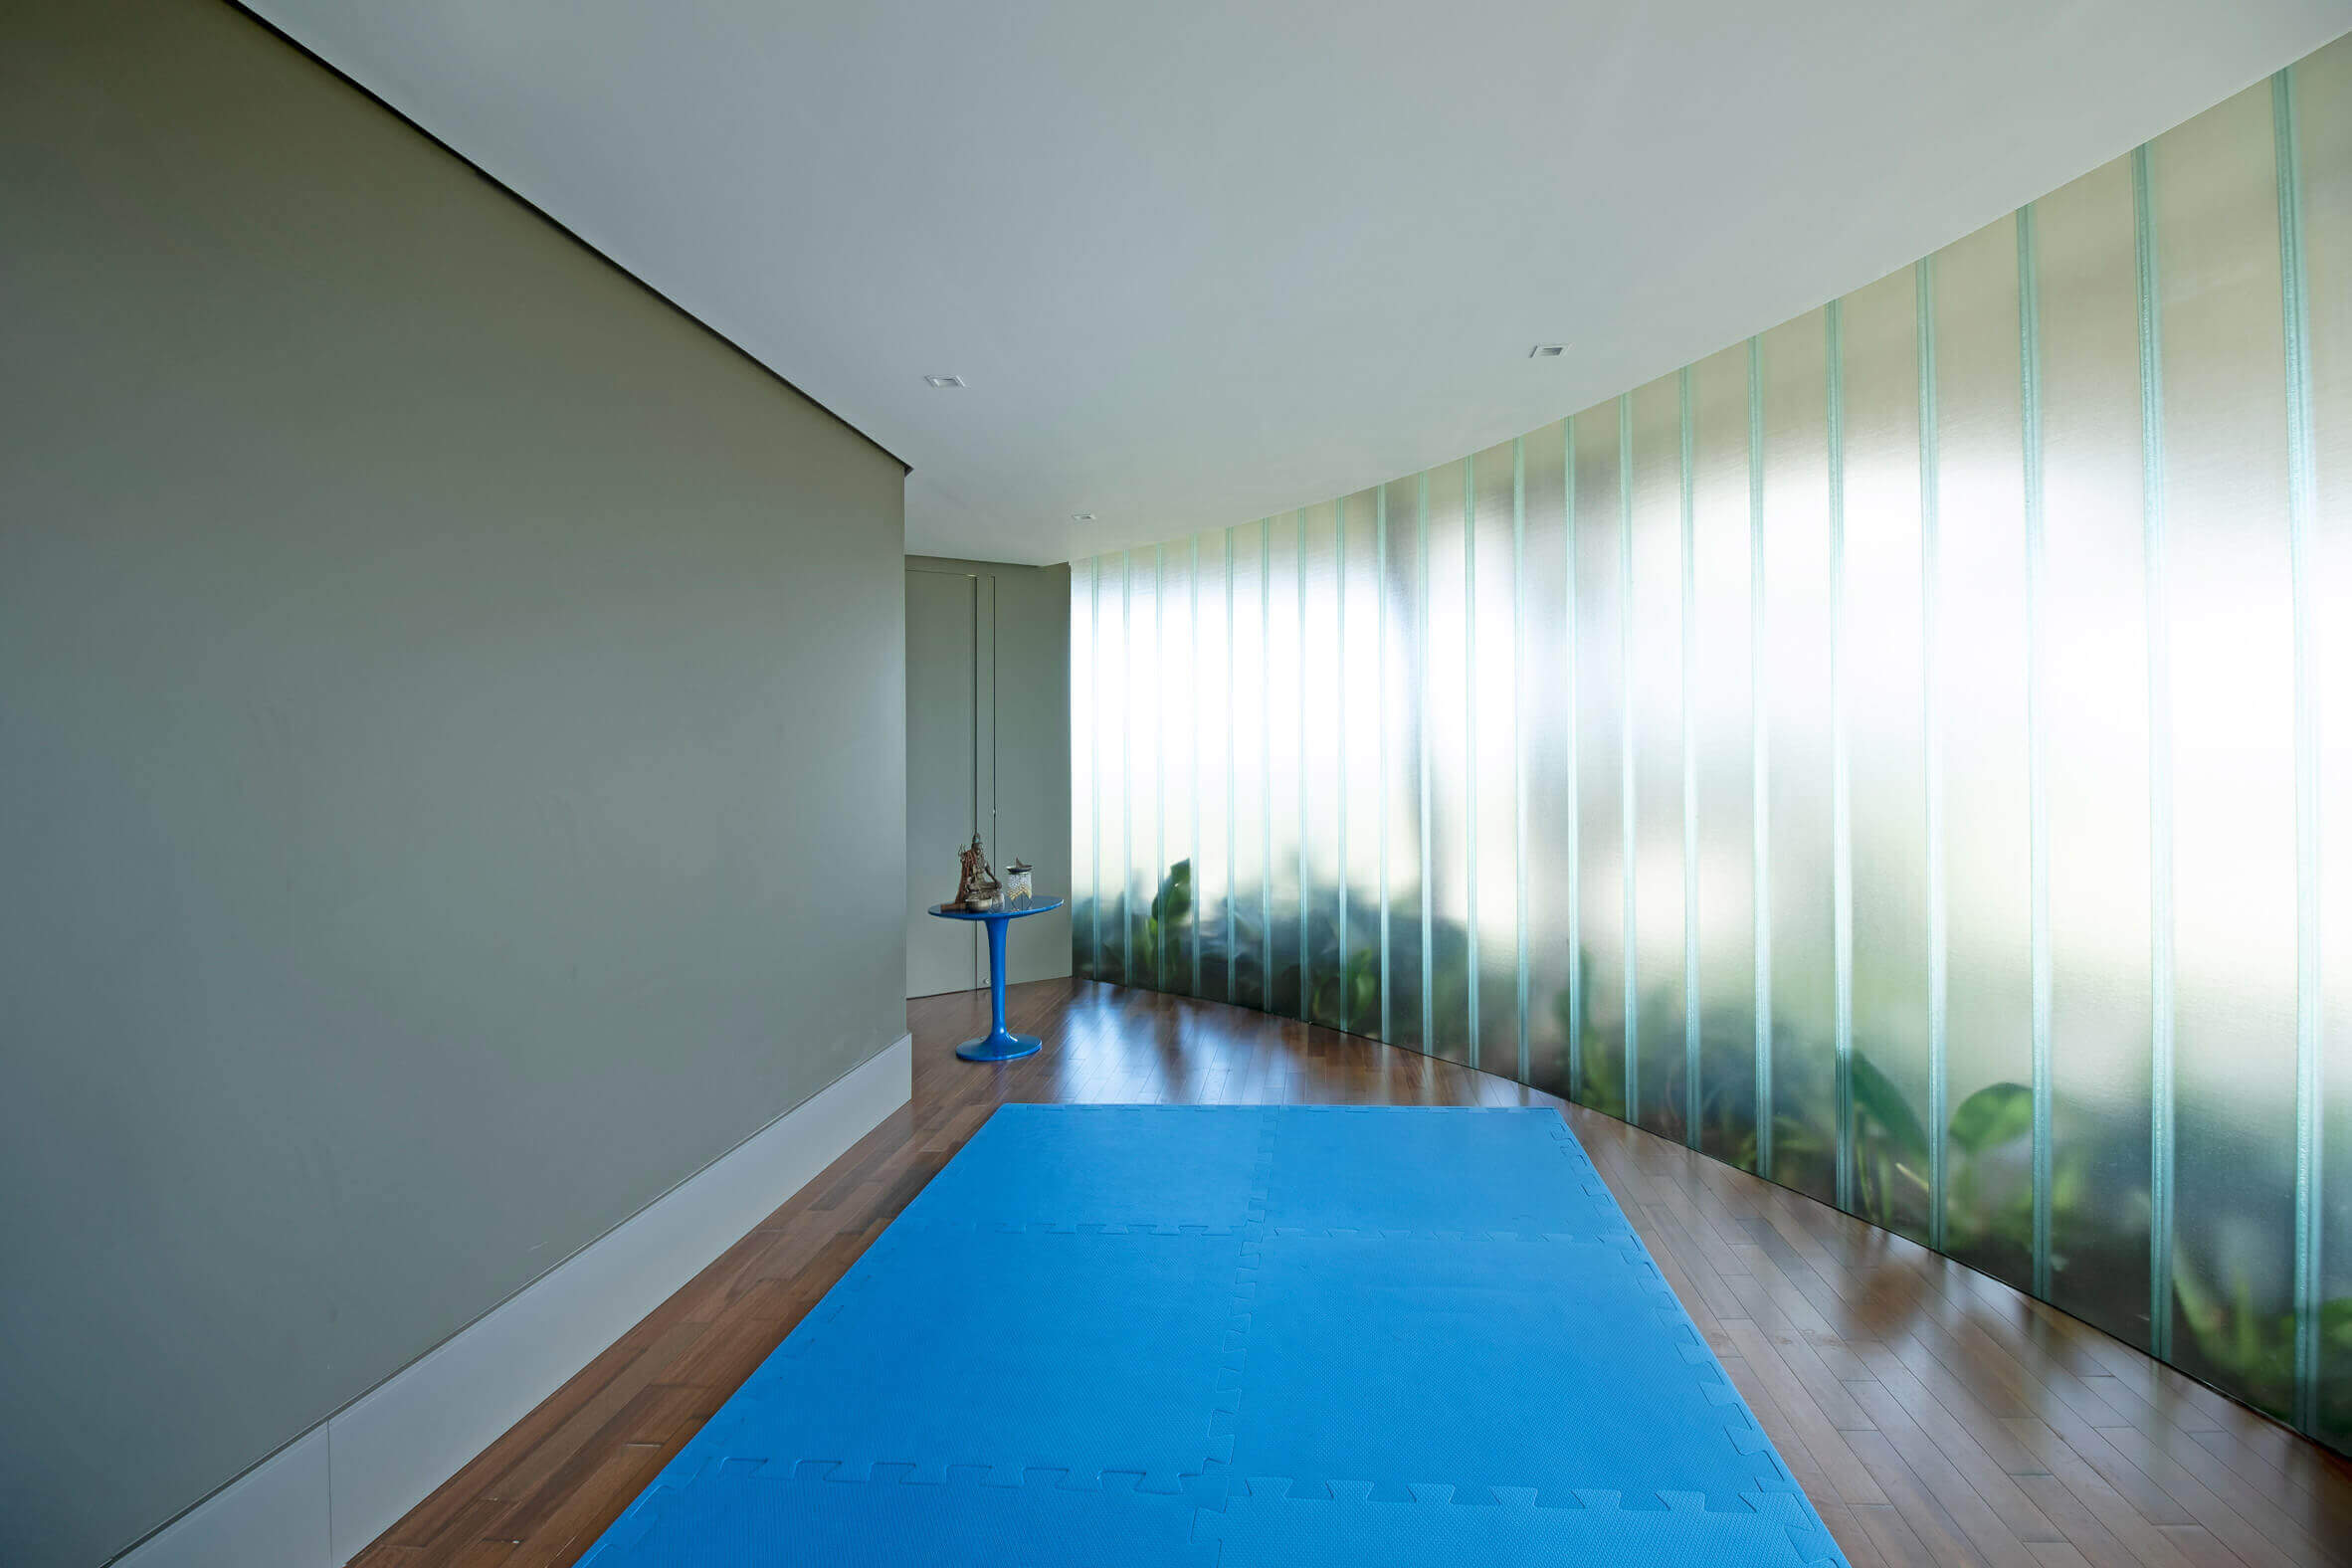 Anada House - Residence and Yoga Studio by Stemmer Rodriguez